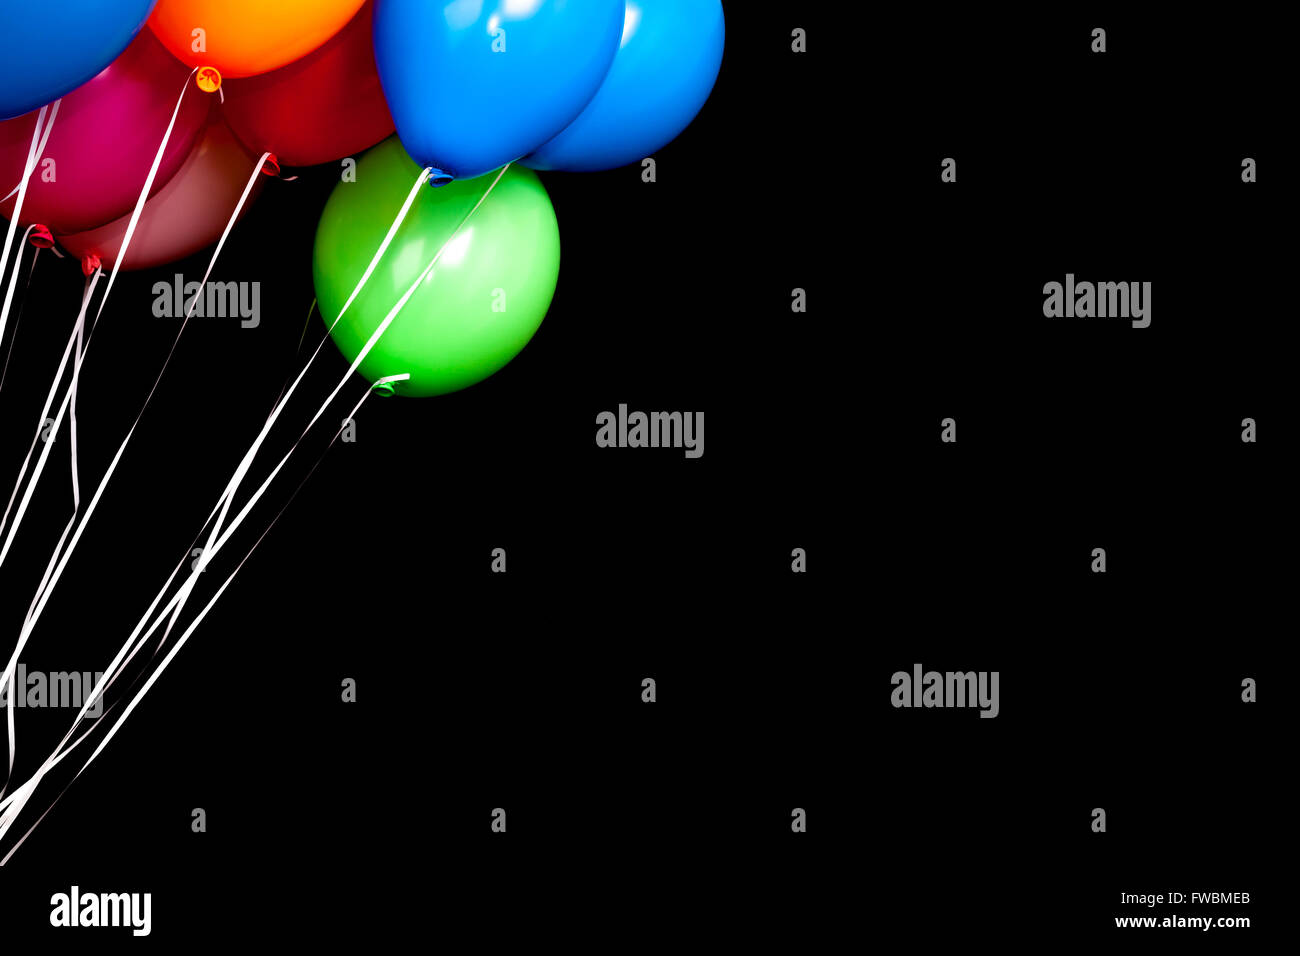 Colorful balloons on ribbons over black background Stock Photo